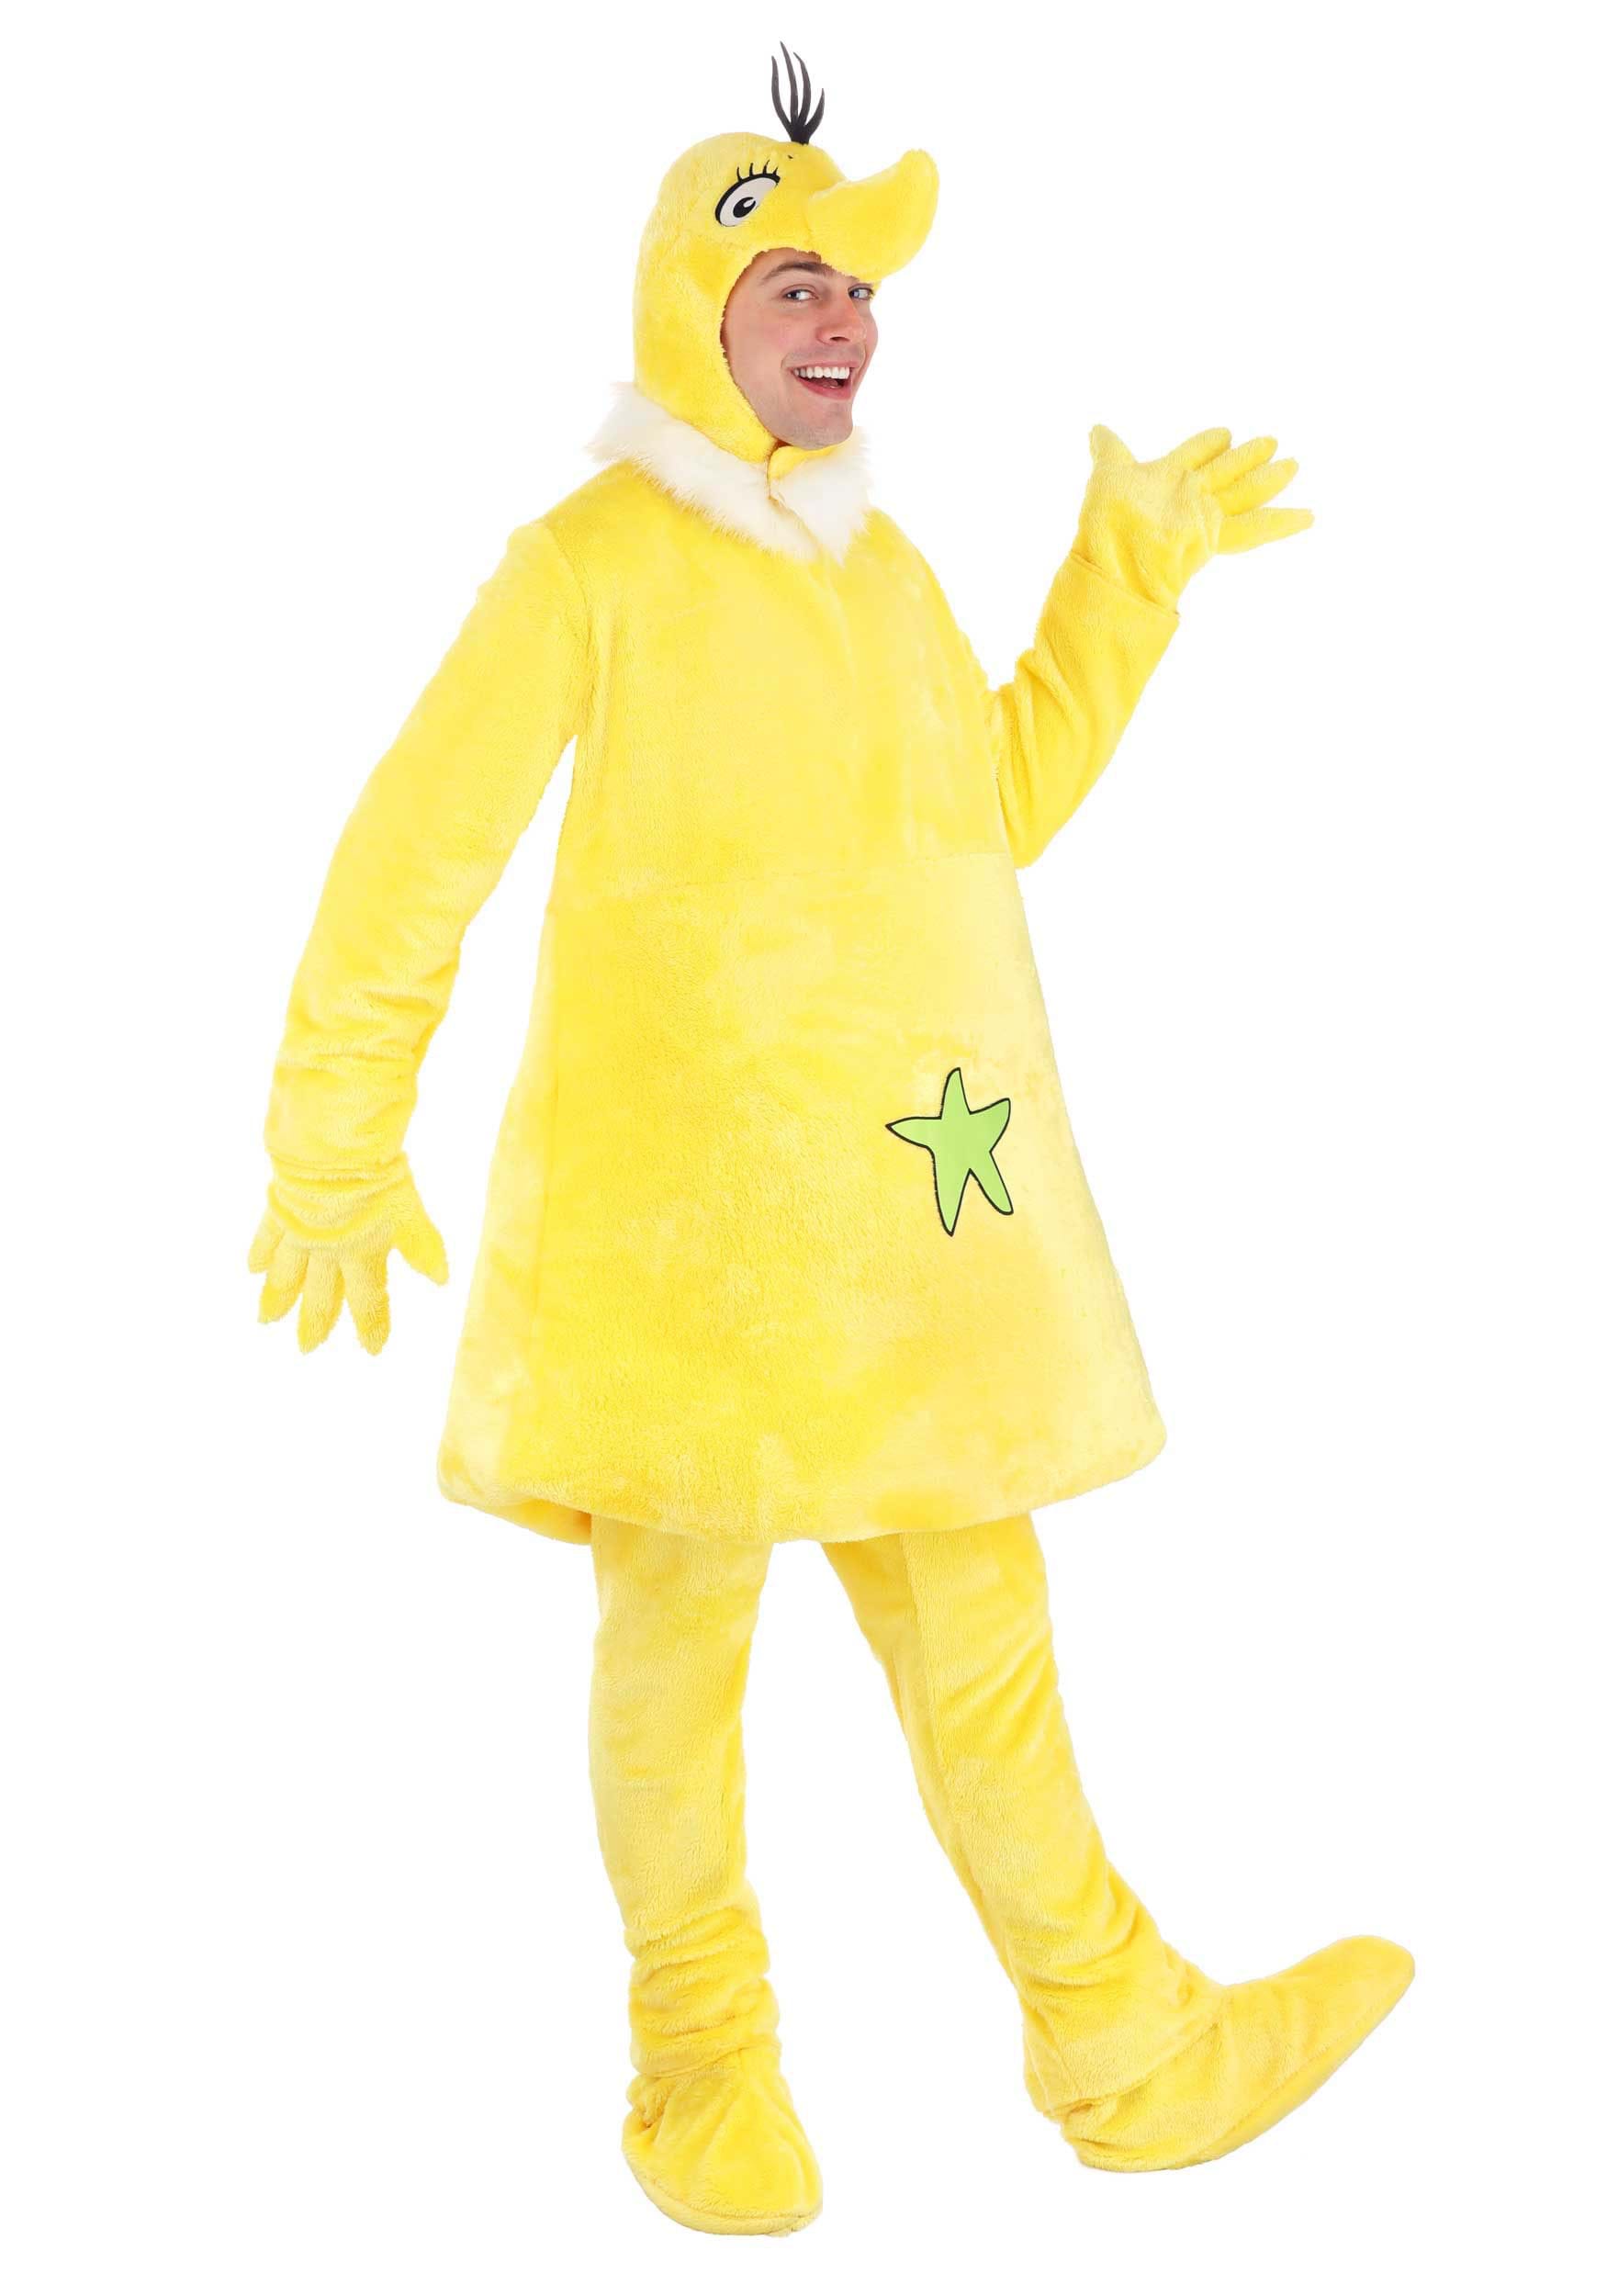 Photos - Fancy Dress FUN Costumes Dr. Seuss Star Bellied Sneetch Costume for Adults | Dr. Seuss